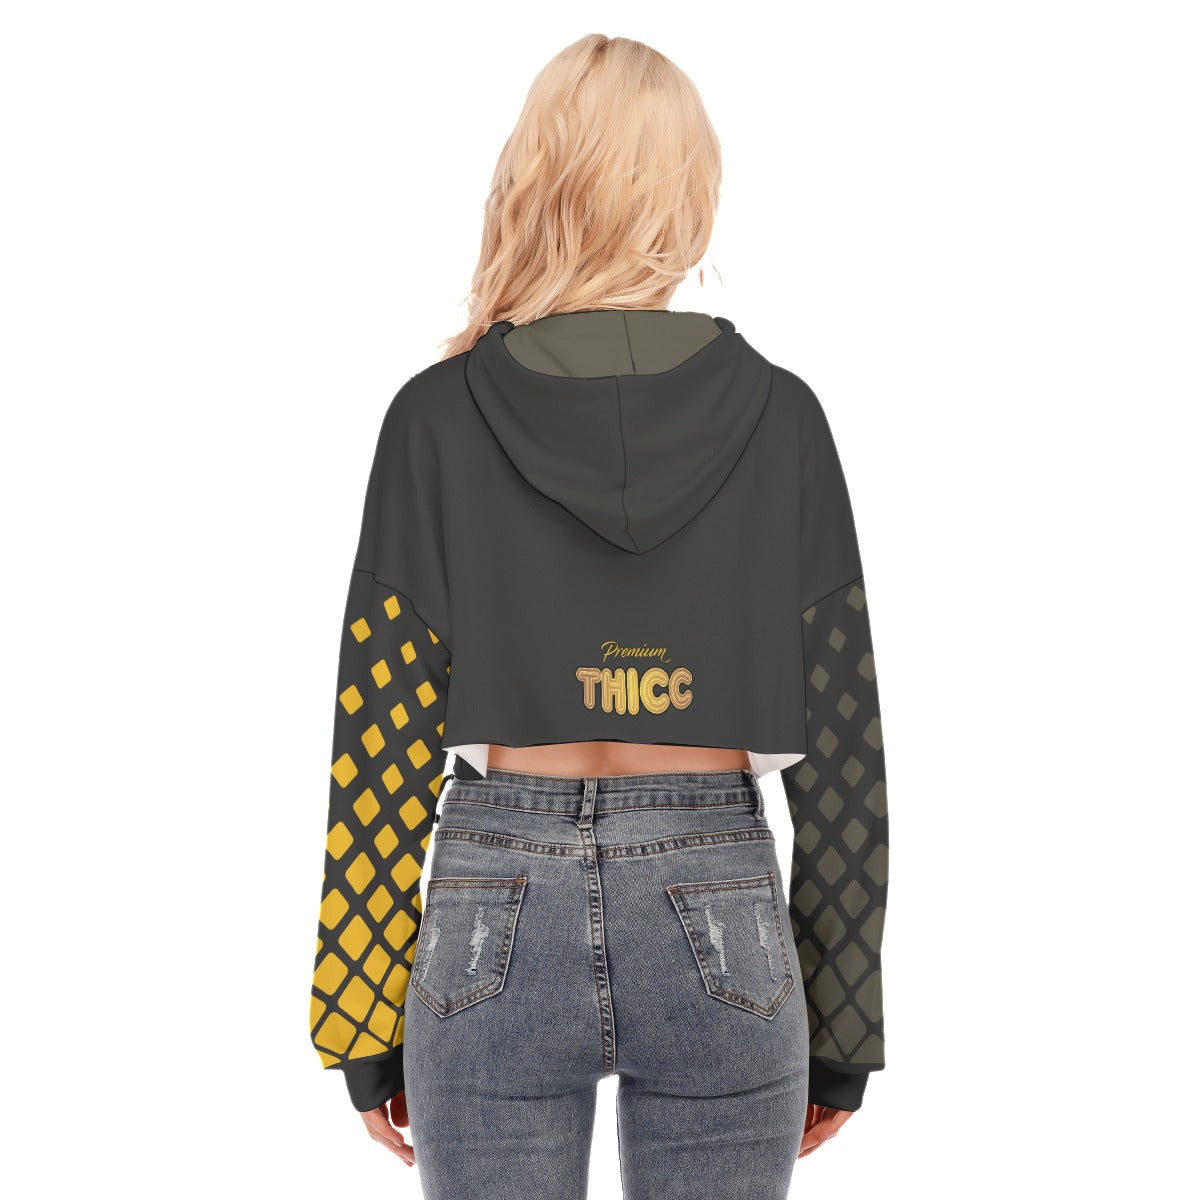 Premium Thicc Midnight Gold Diamond Women's Cropped Hoodie With Zipper Closure